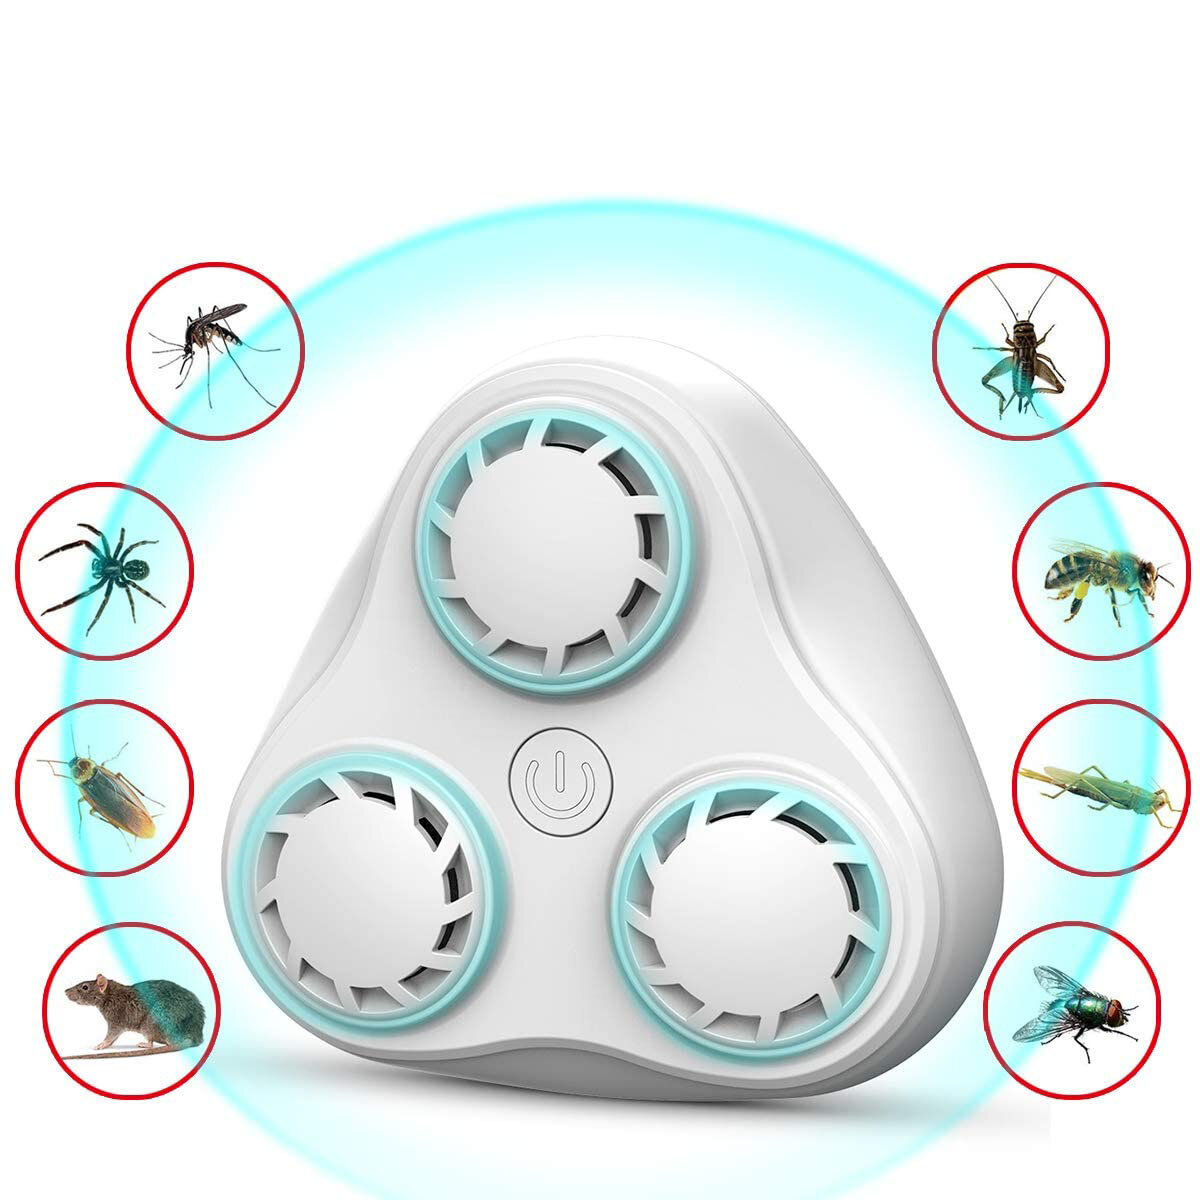 

BG310 Ultrasonic Plug Electronic Indoor Pest Control Mosquito Mice Spider Rodent Insect Repeller